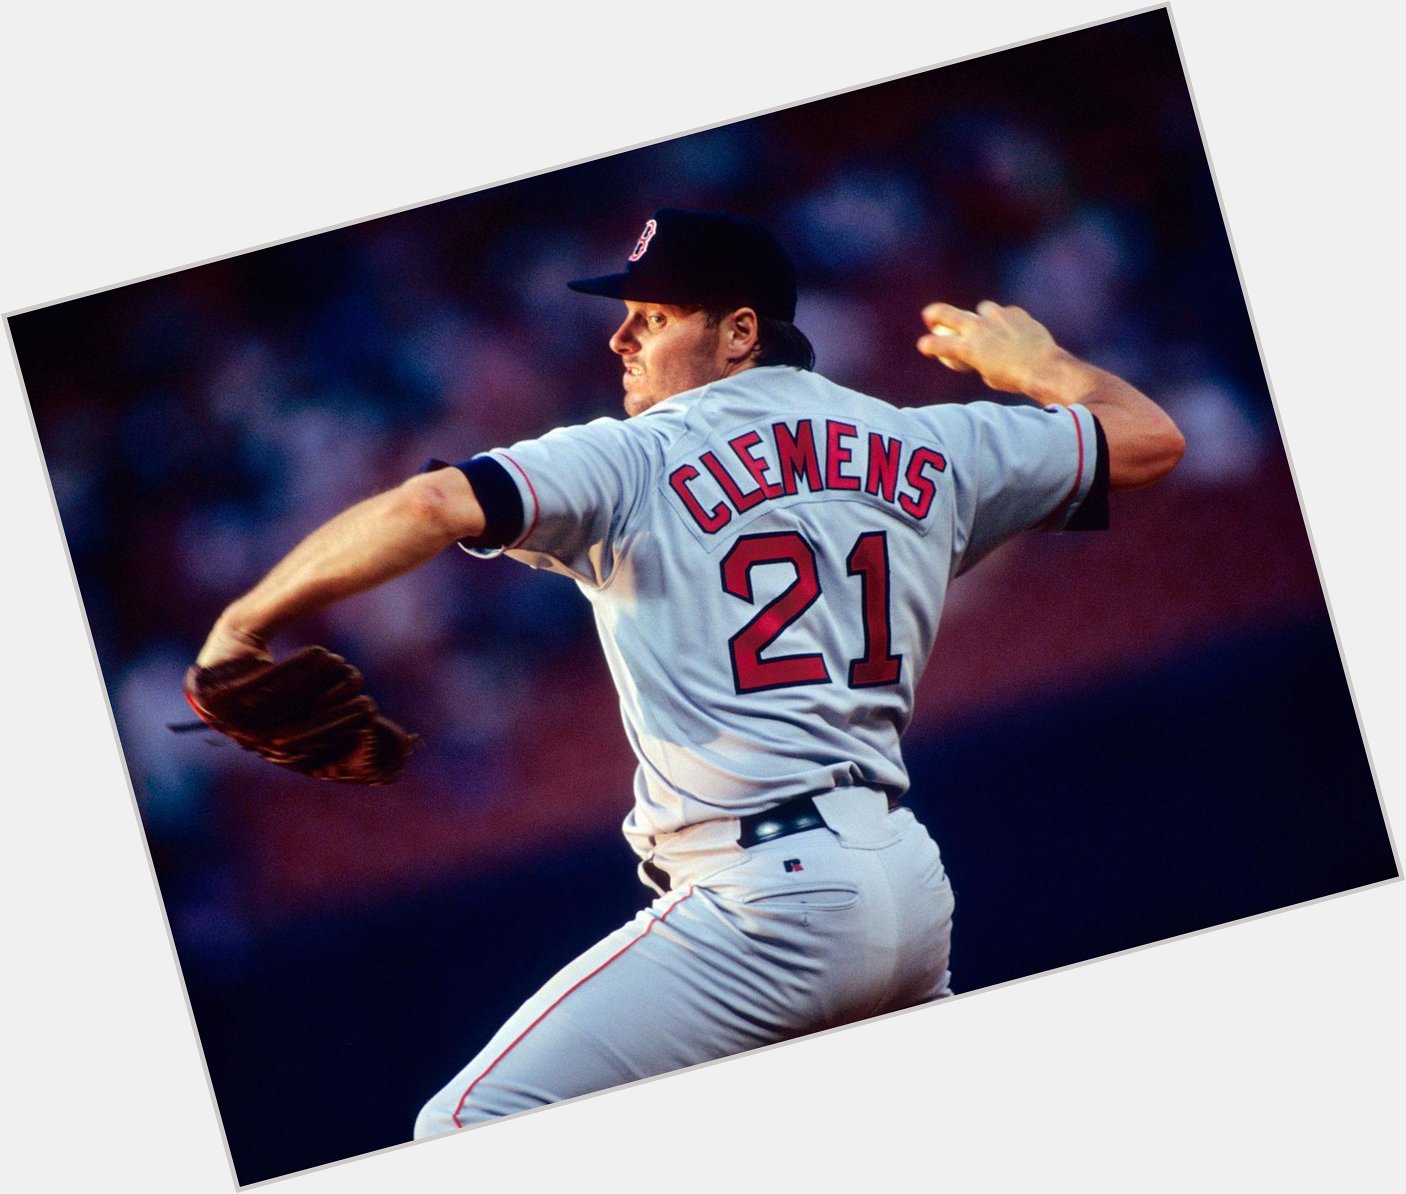 Happy birthday to Roger Clemens... who we can all agree was good, right? 